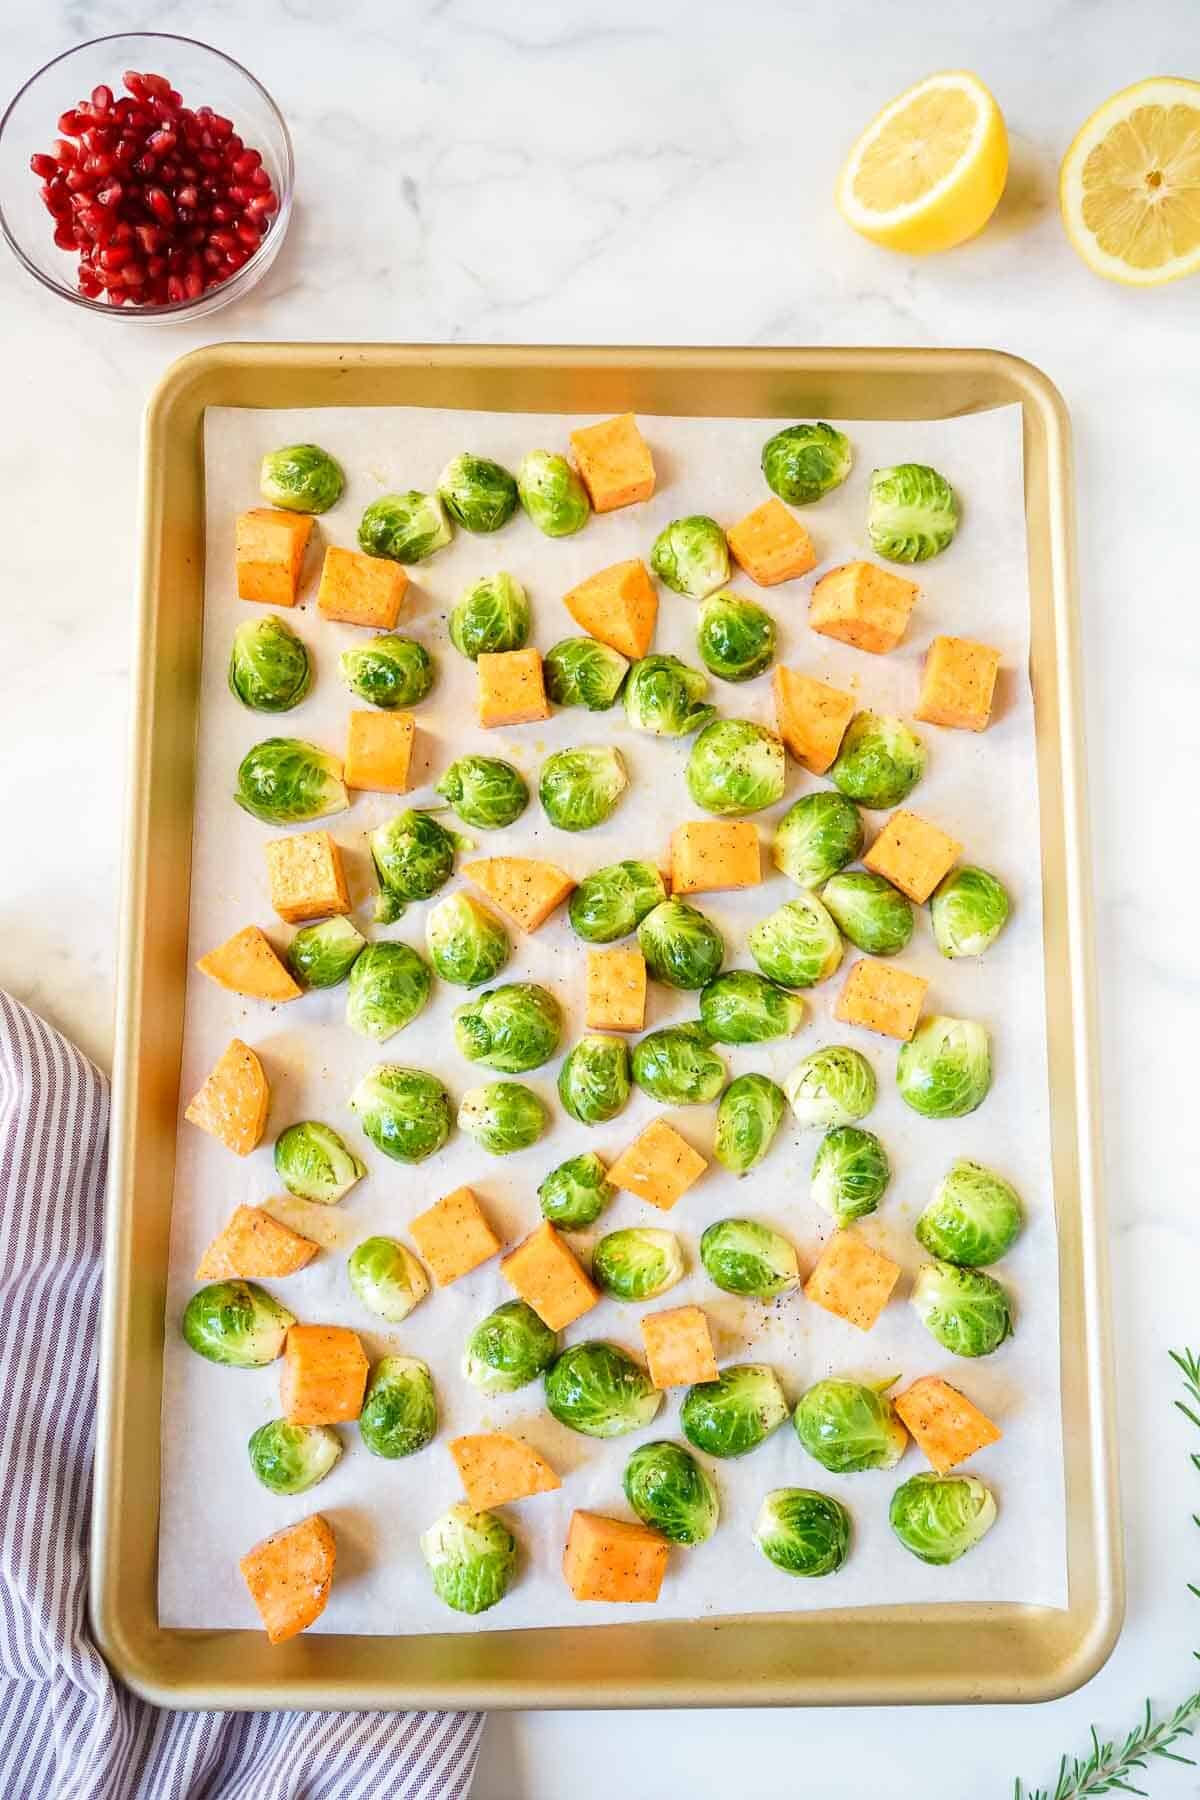 Uncooked brussels sprouts and sweet potatoes on a sheet pan.